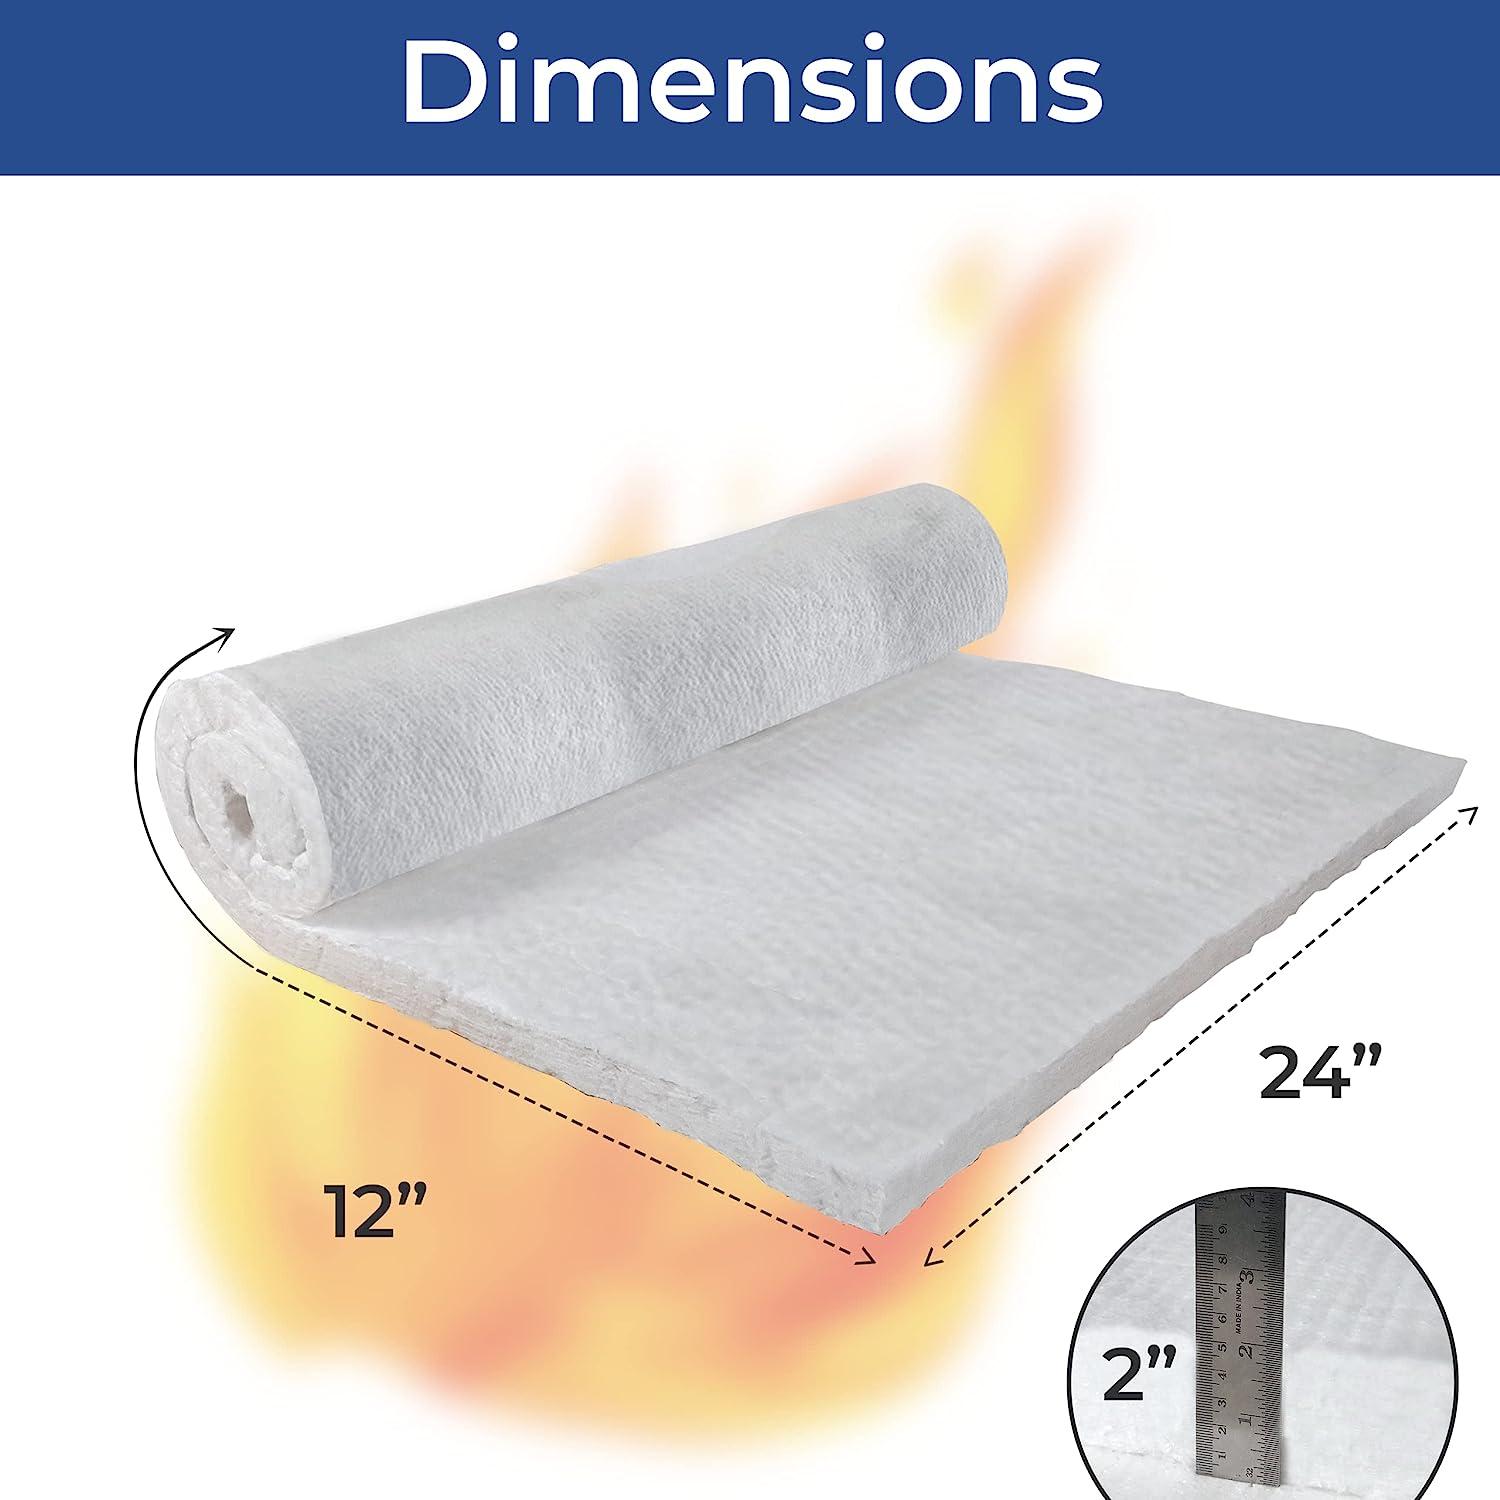 WMEIE Ceramic Fiber Insulating Blanket, High Density High Temperature  2300F, Durable, Lightweight, for Wood Stoves Fireplaces Furnaces Forges  Kiln